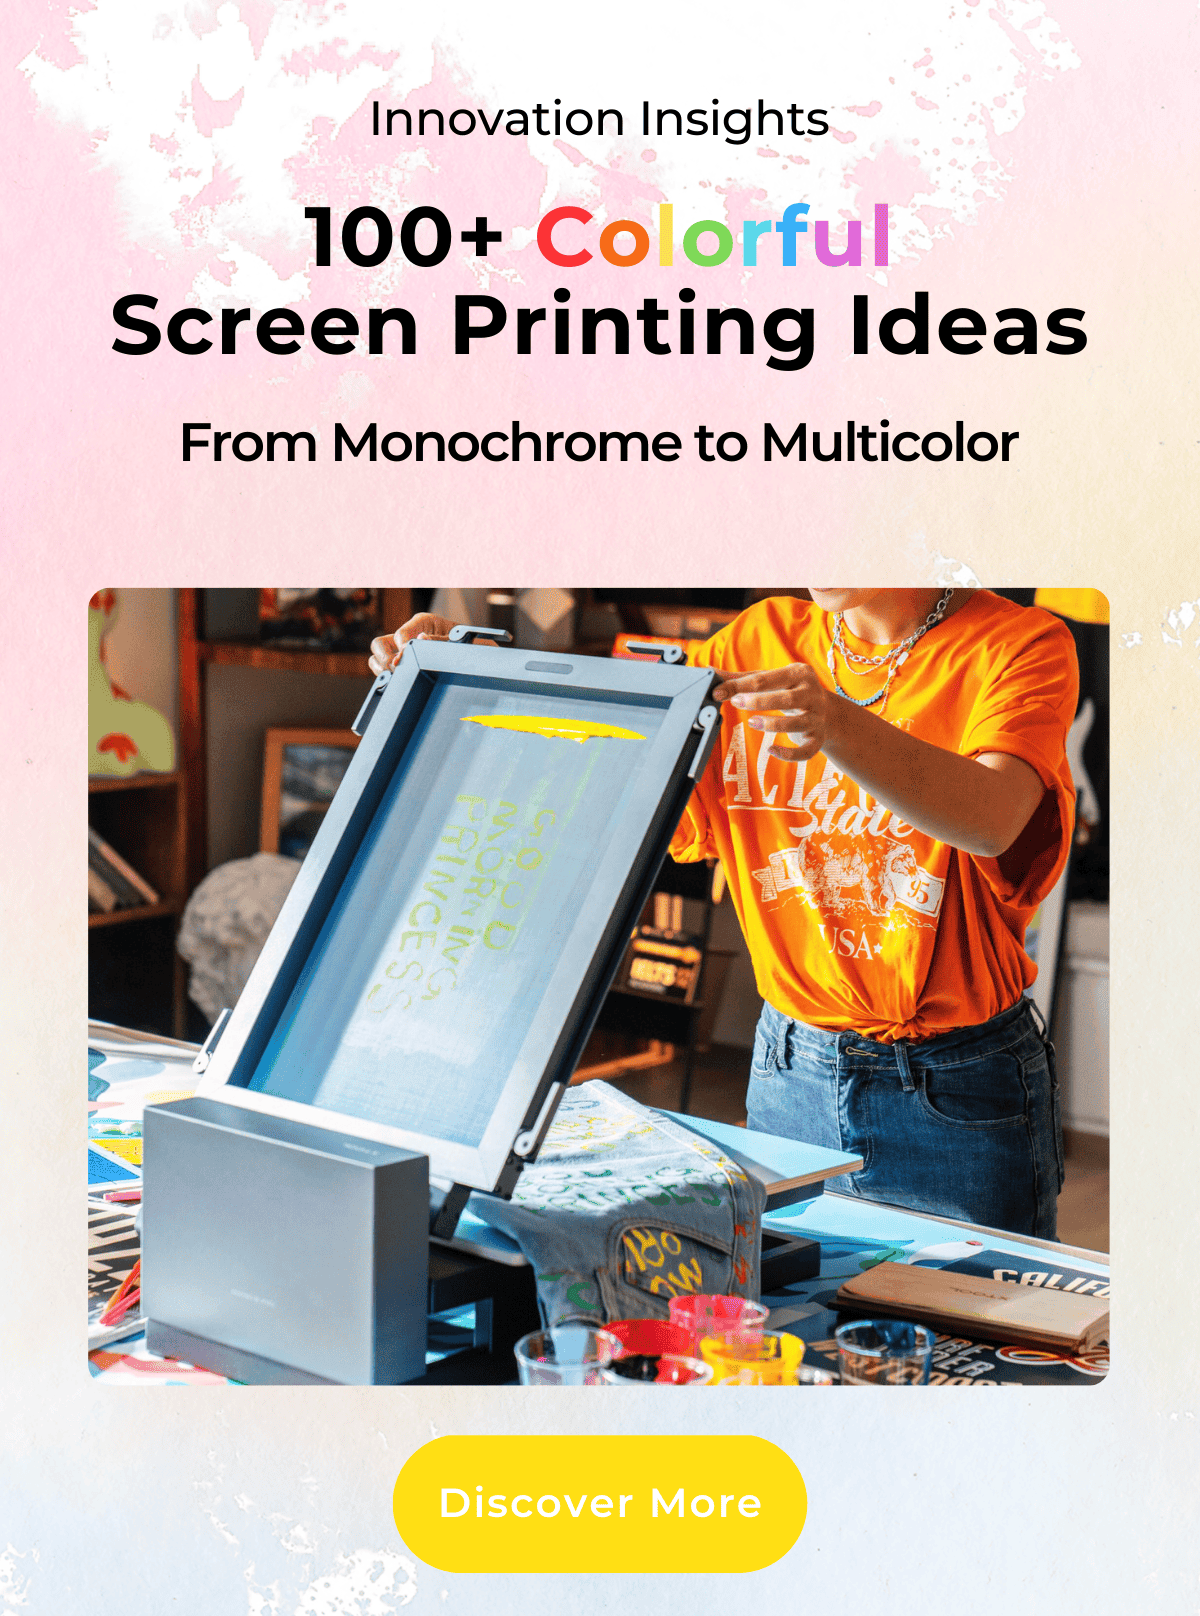 100+ colorful screen printing ideas